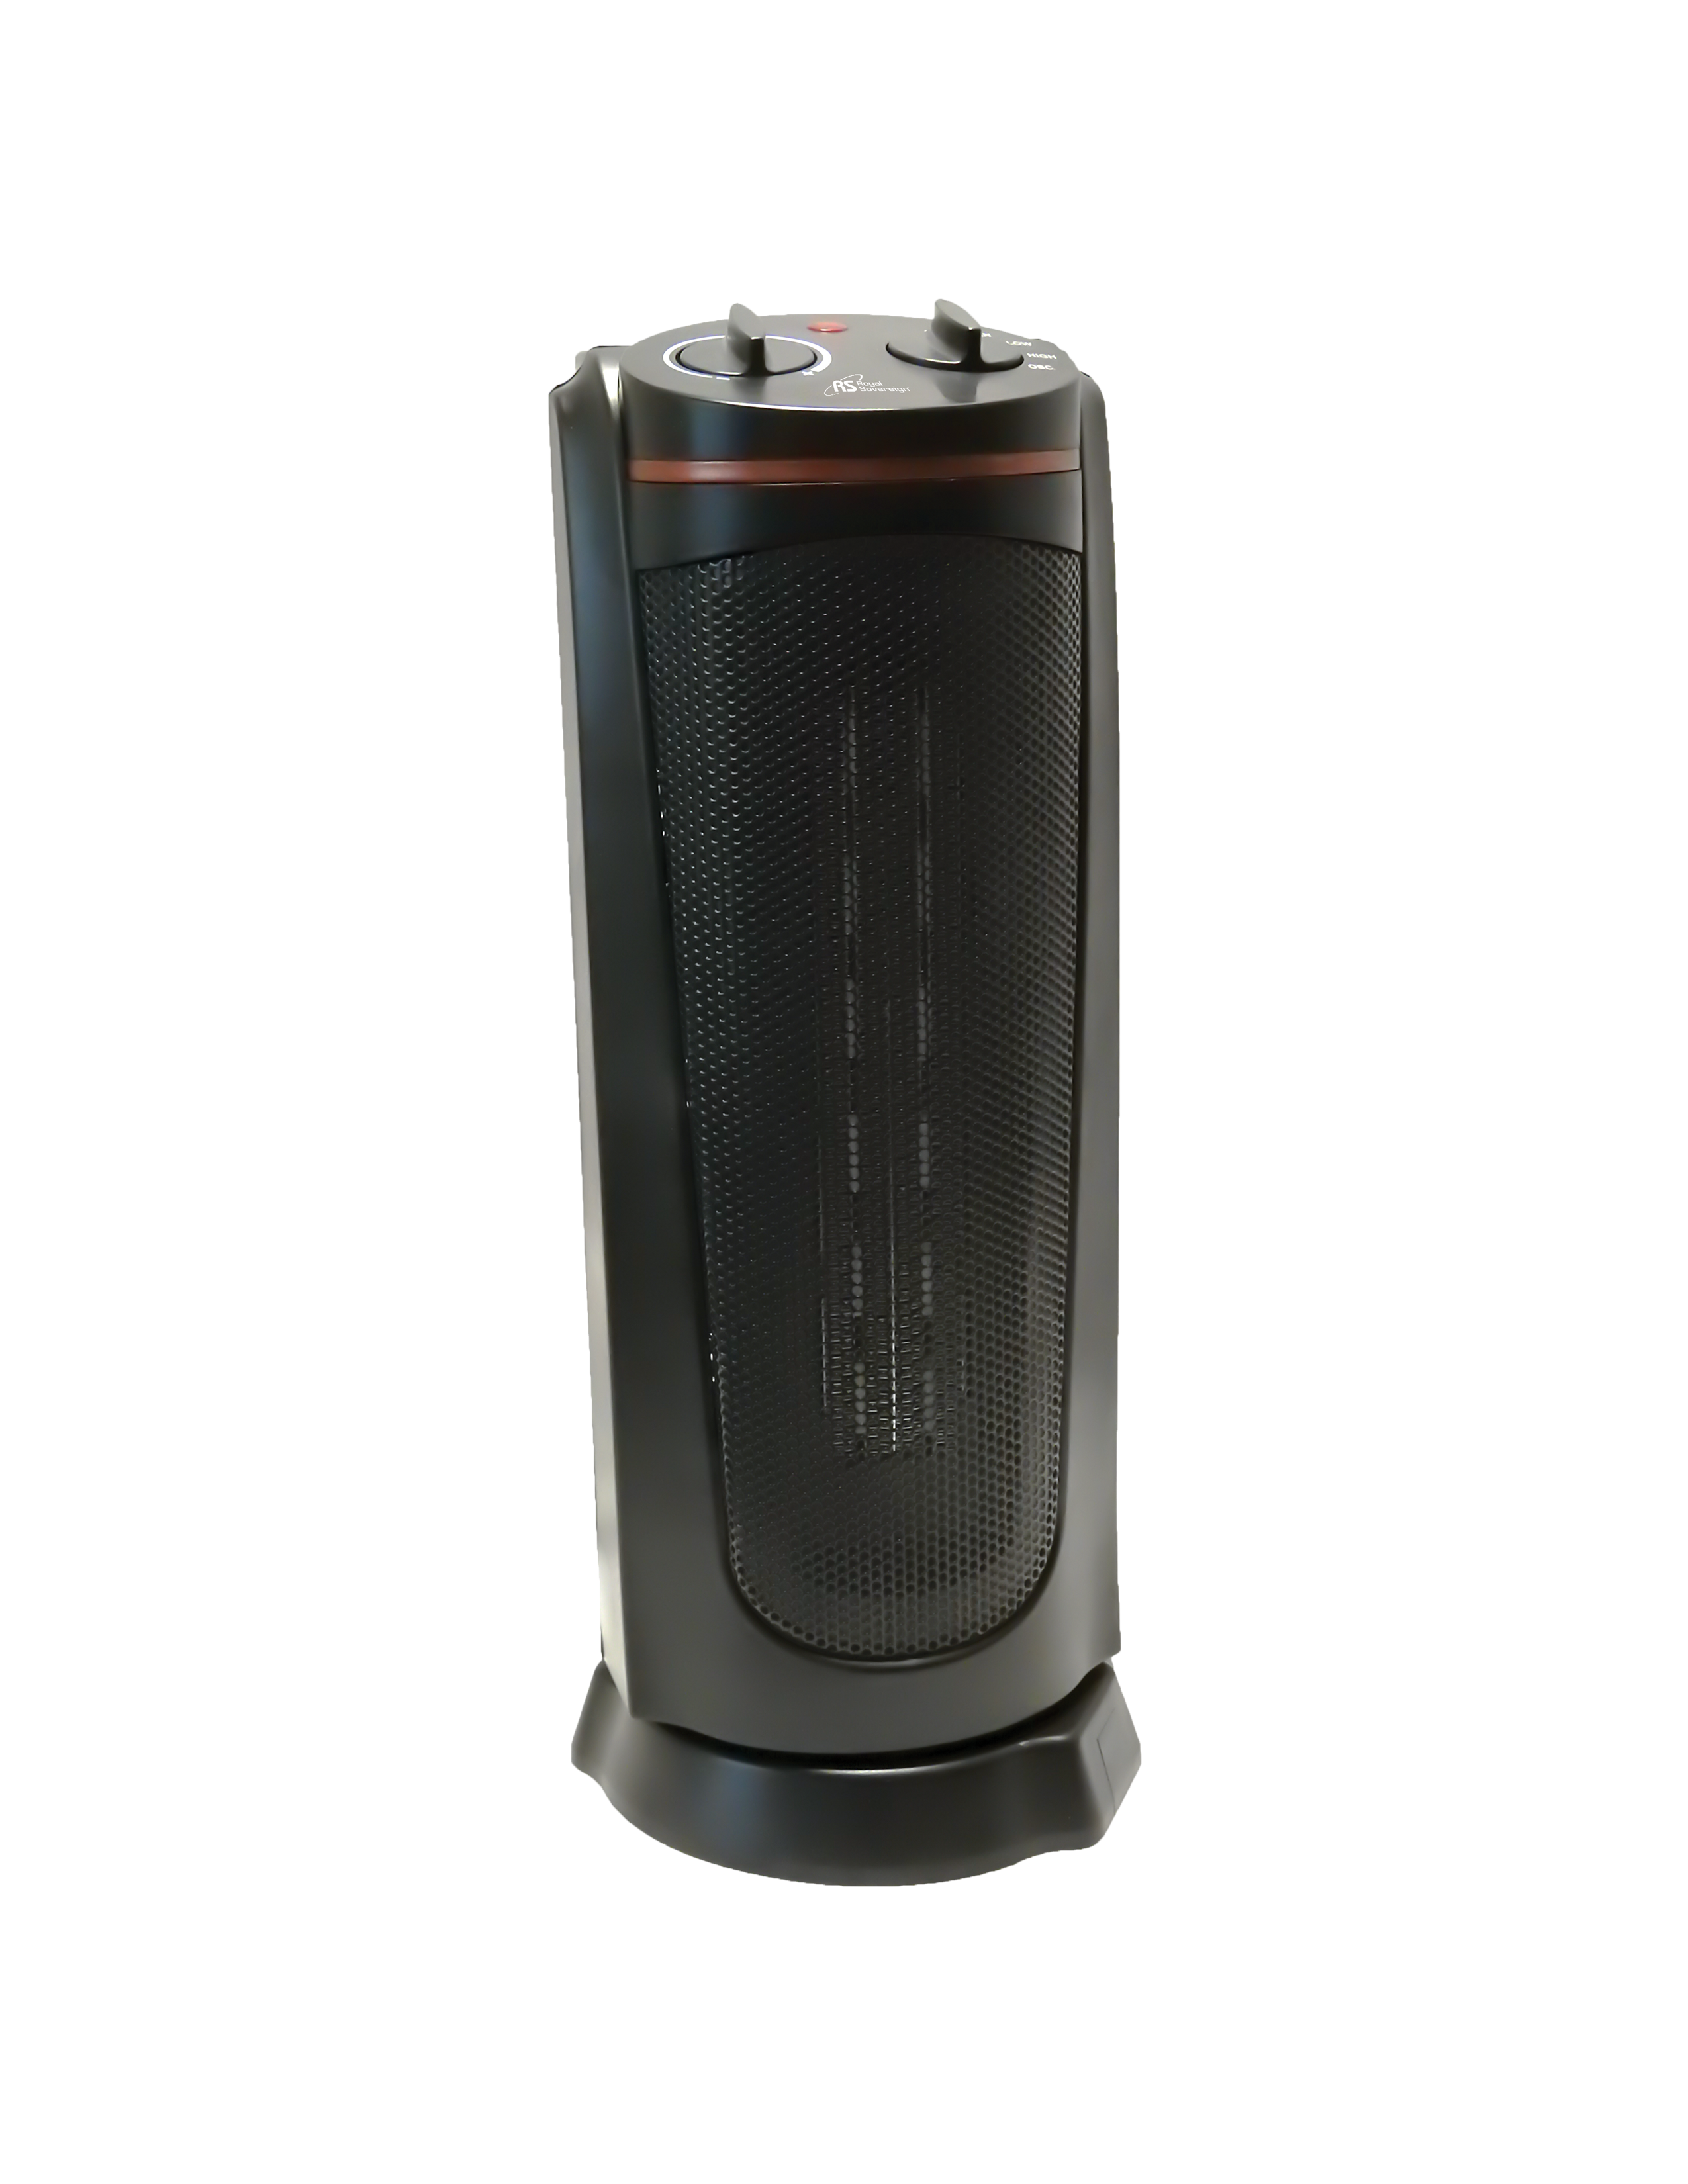 HCE-190/ 19” Compact Ceramic Tower Heater